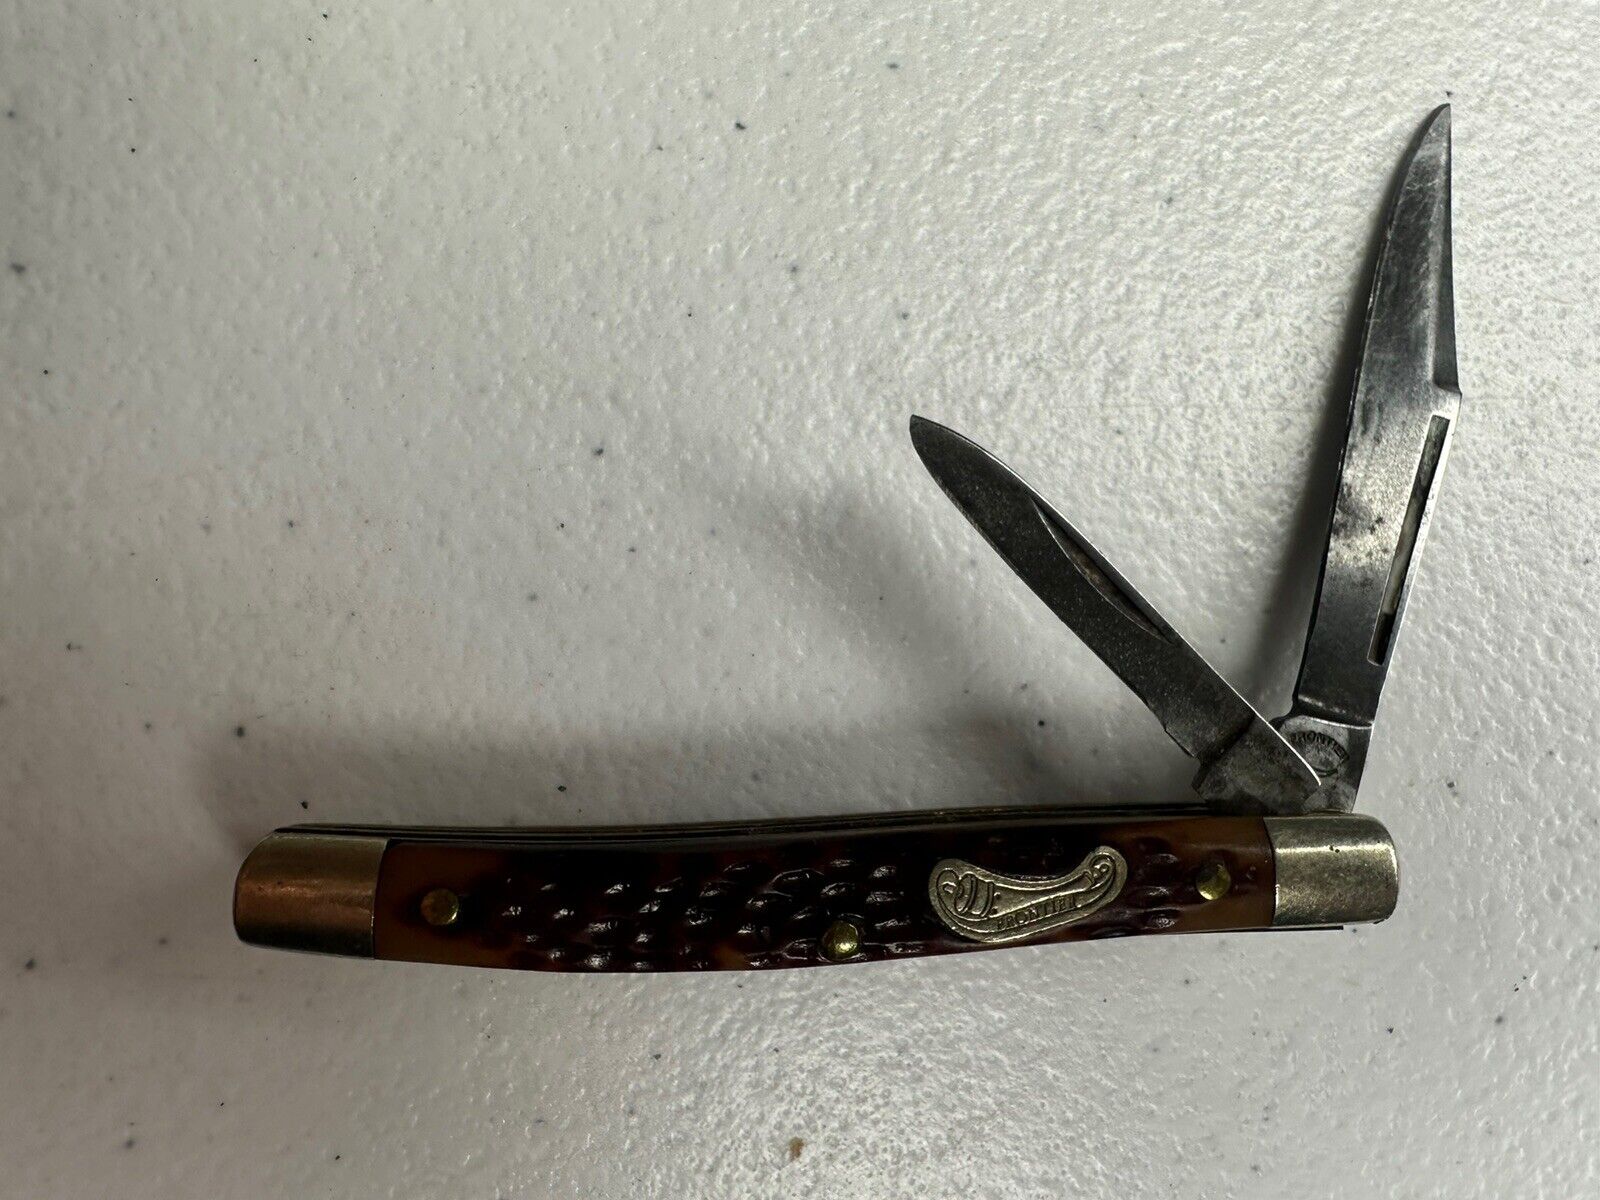 Vintage Frontier 4021 Double Blade Folding Knife – Collectible Pocket Knife with Wobbly Blade - TreasuTiques